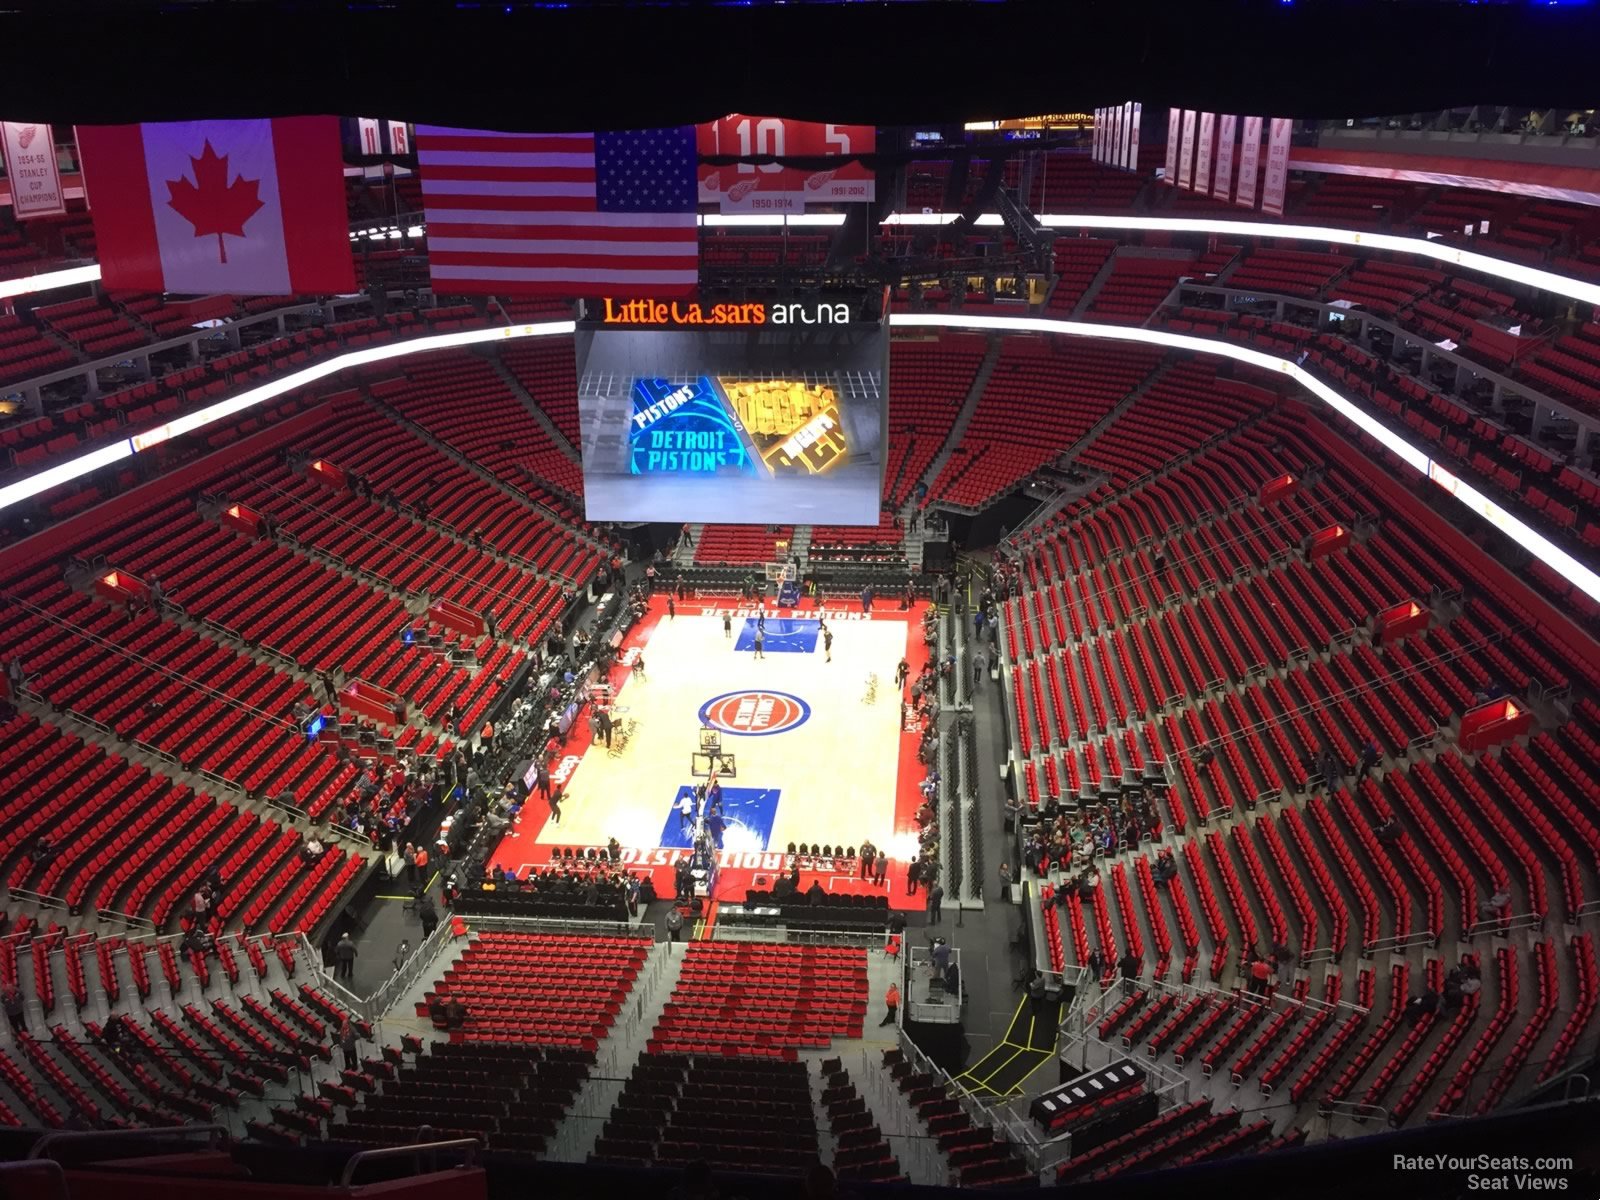 Little Caesars Arena, section 218, home of Detroit Pistons